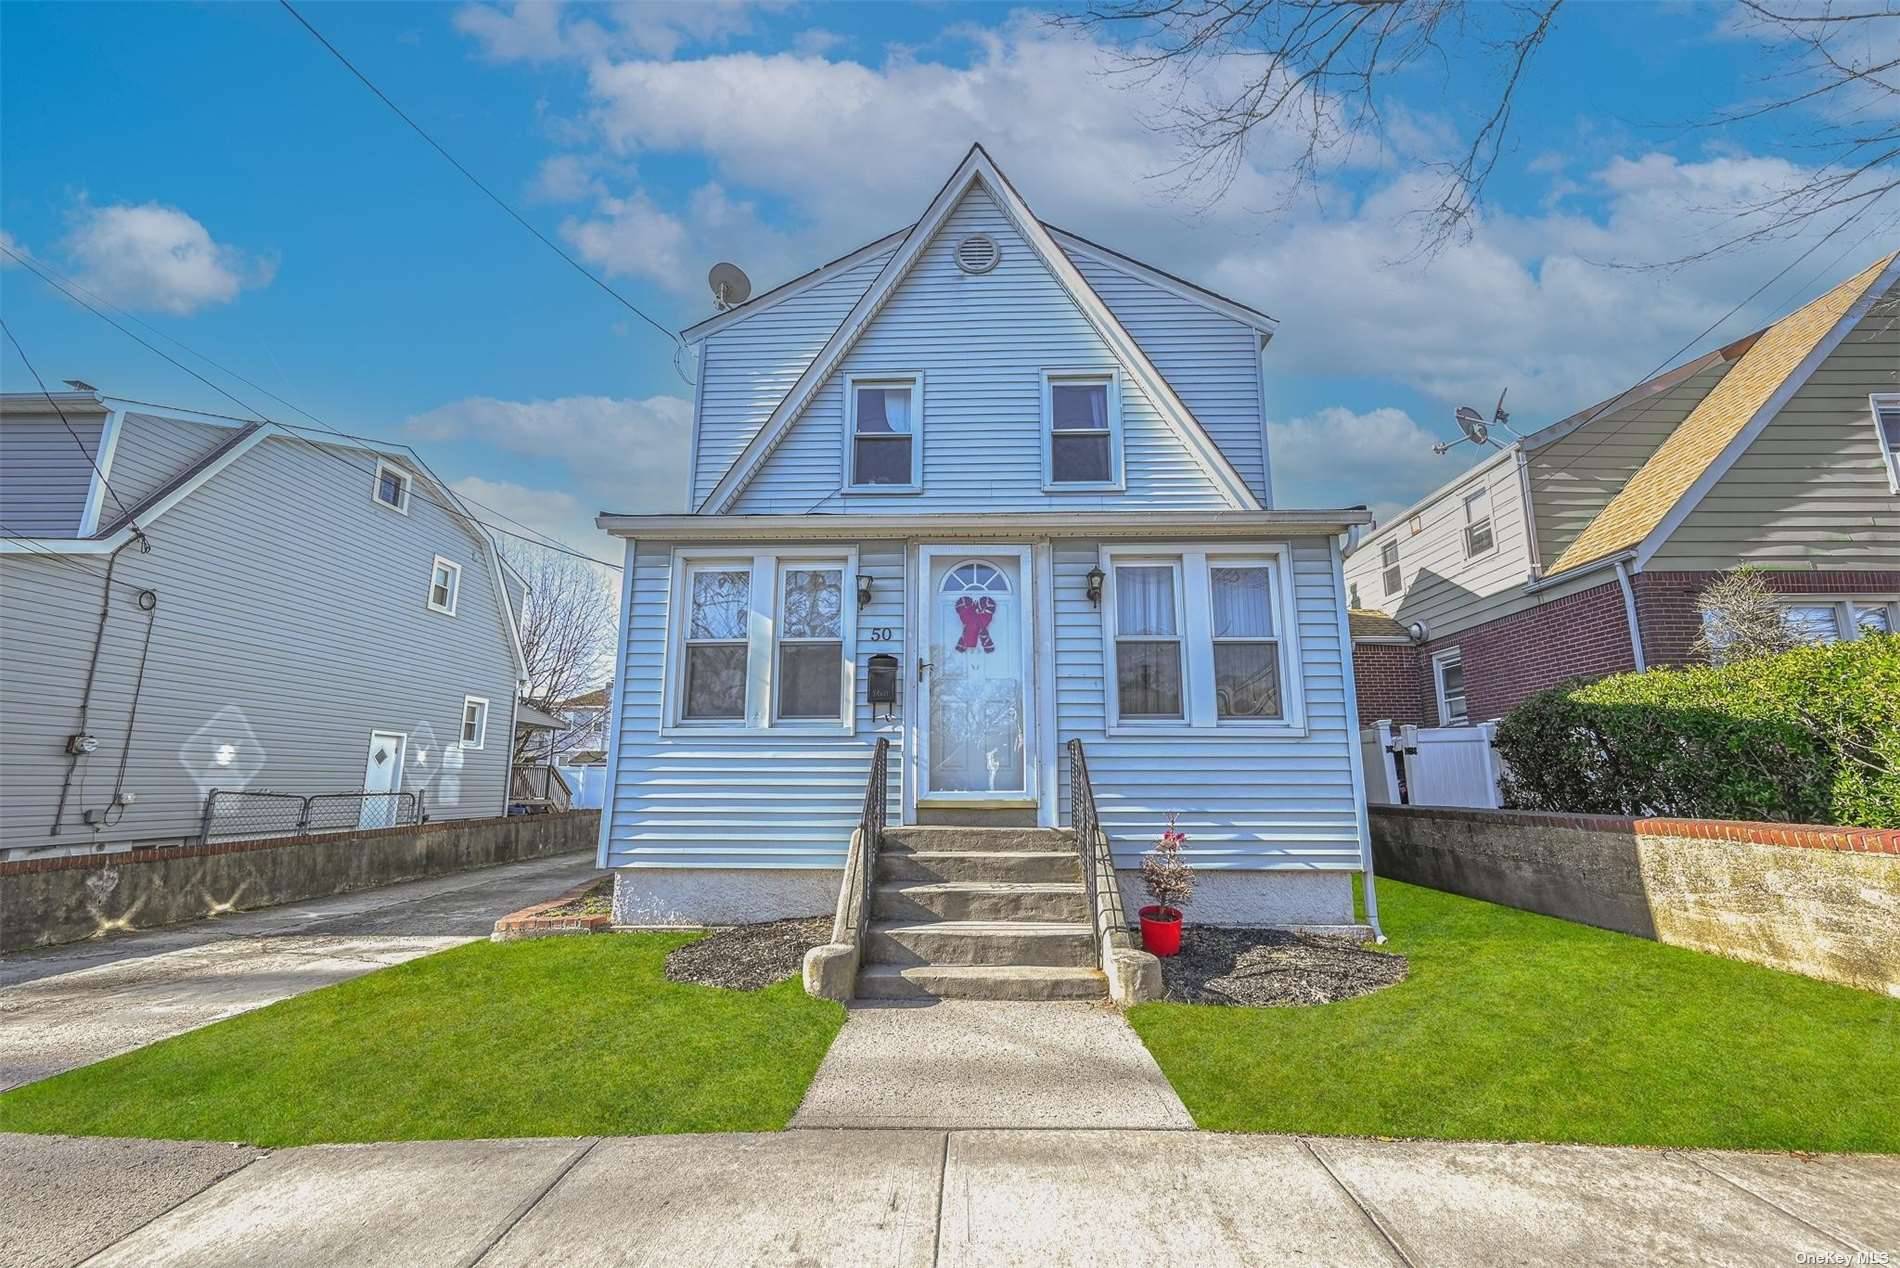 Welcome to 50 McKee St, Floral Park, NY 11001 a beautifully Colonial renovated home that seamlessly blends modern comfort with timeless charm.